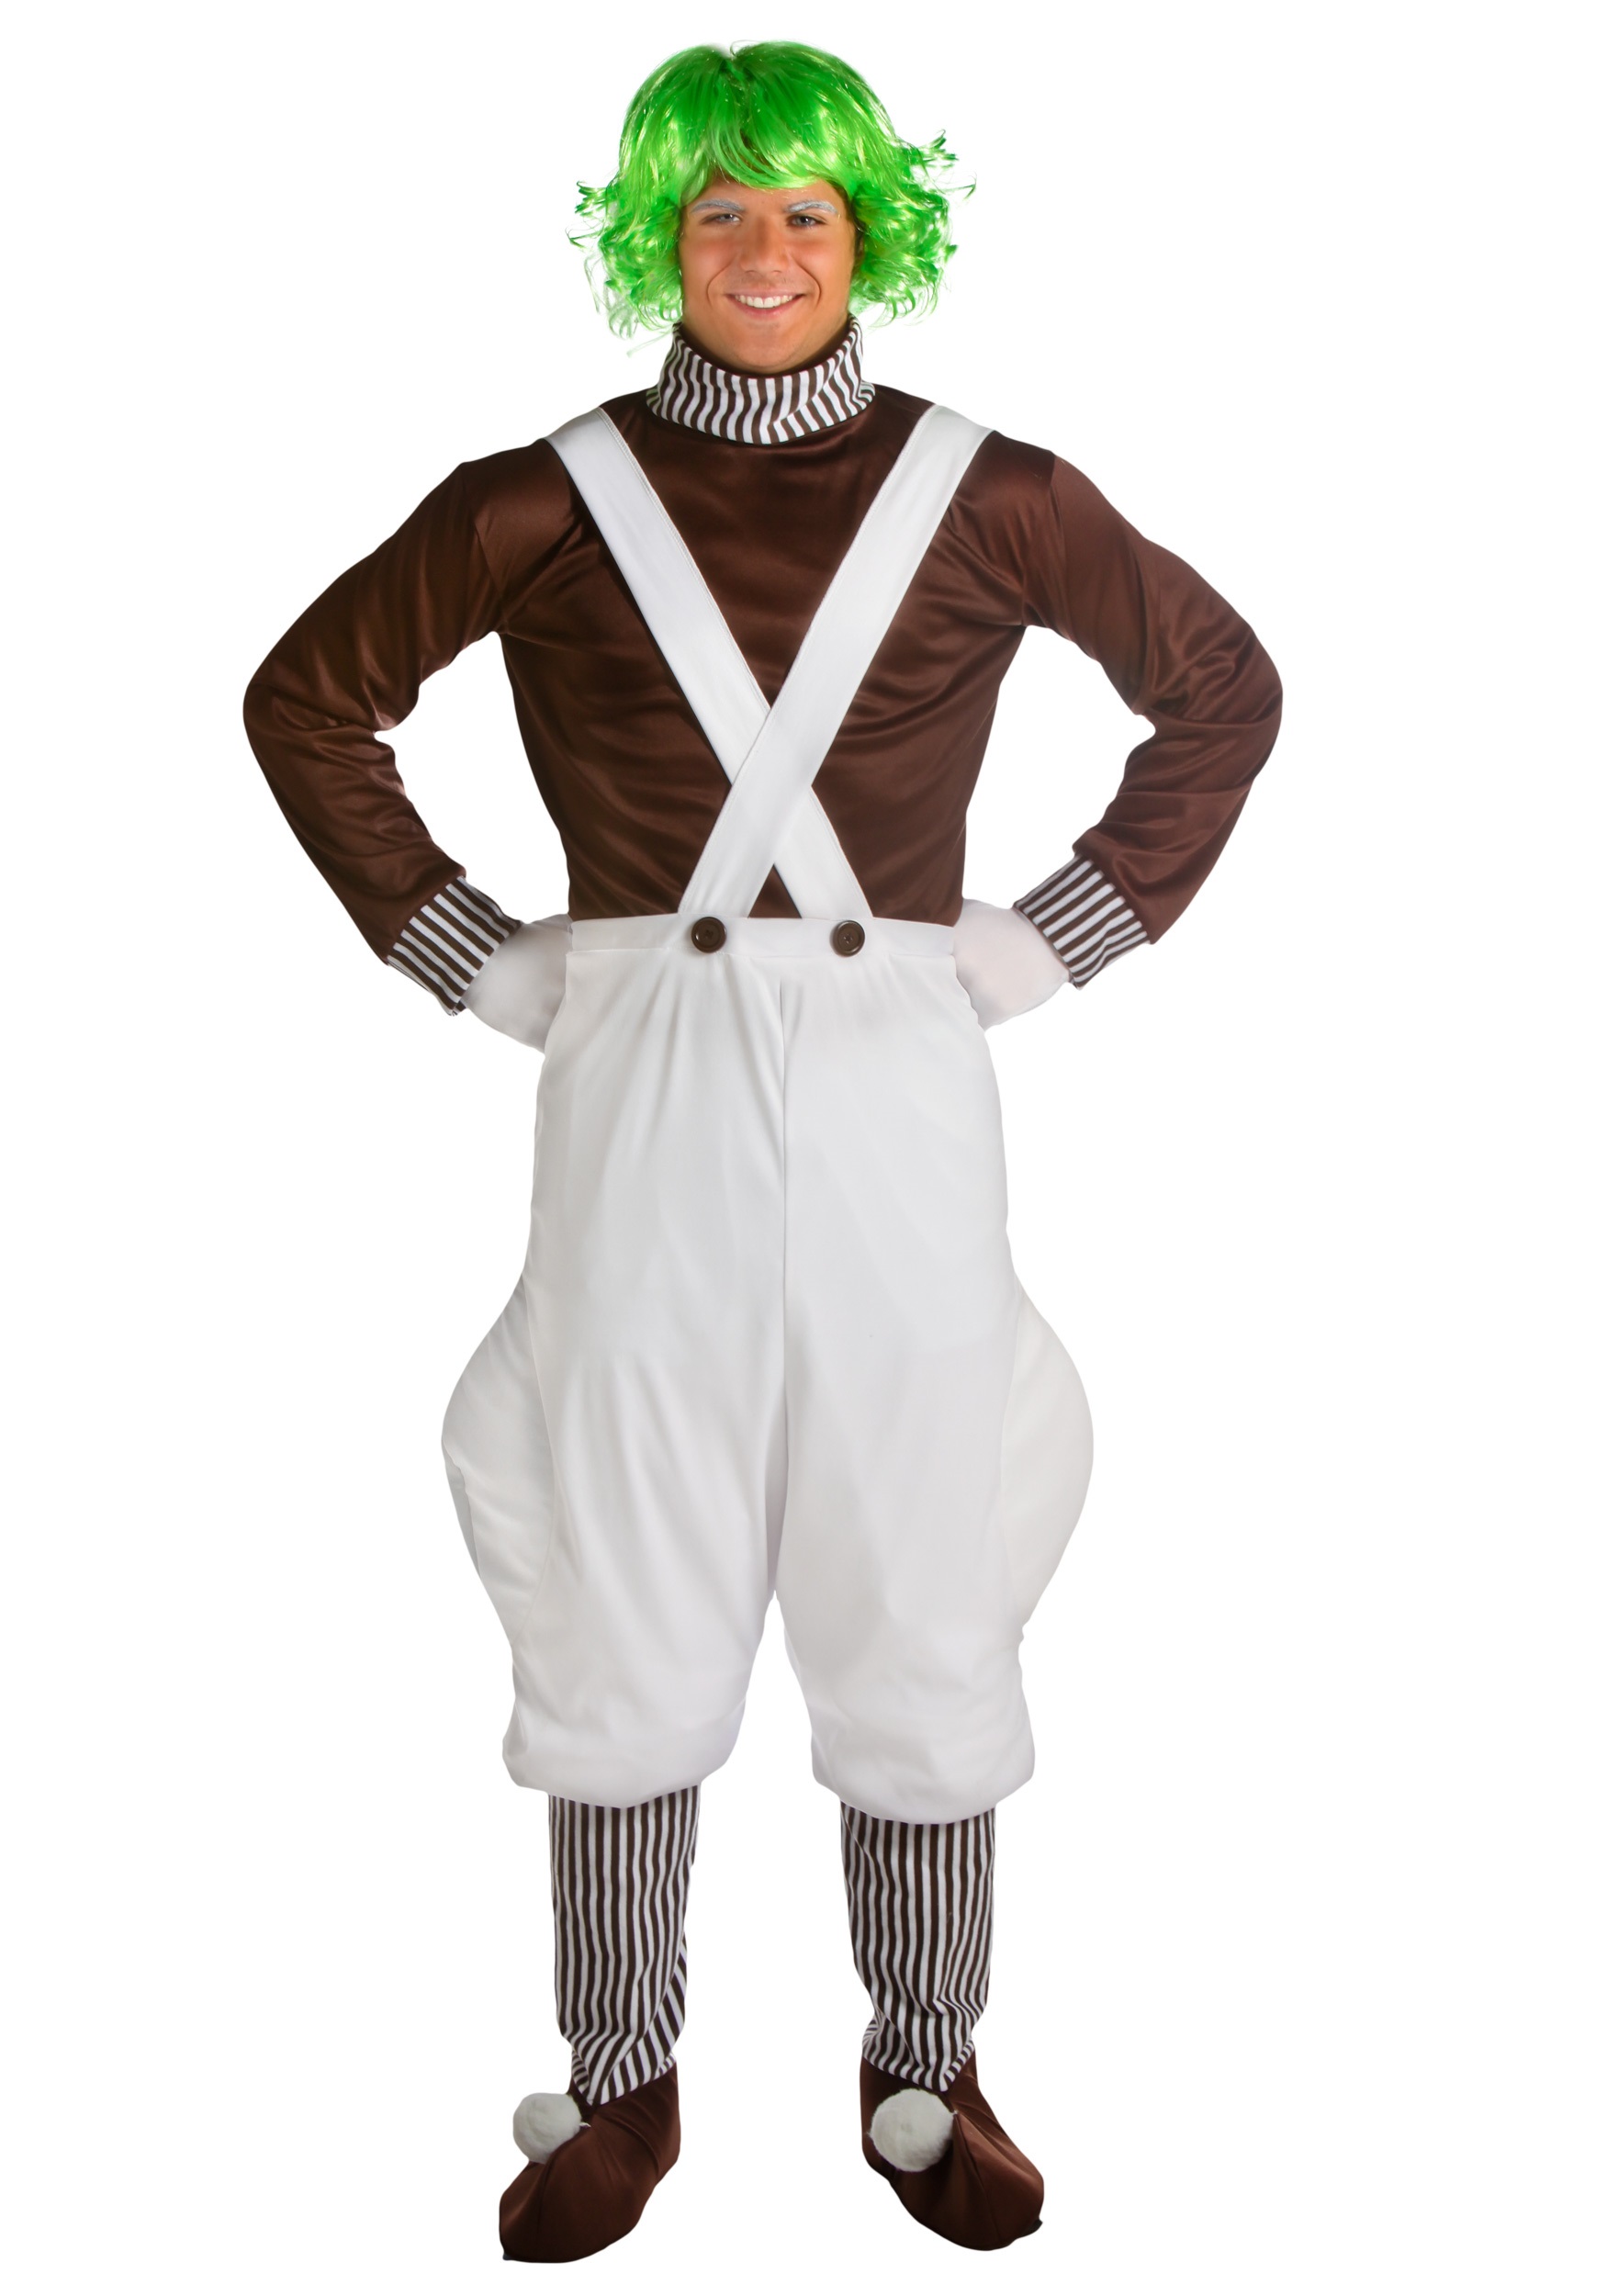 Photos - Fancy Dress WORKER FUN Costumes Oompa Loompa Plus Size  Costume for Men Brown/ 